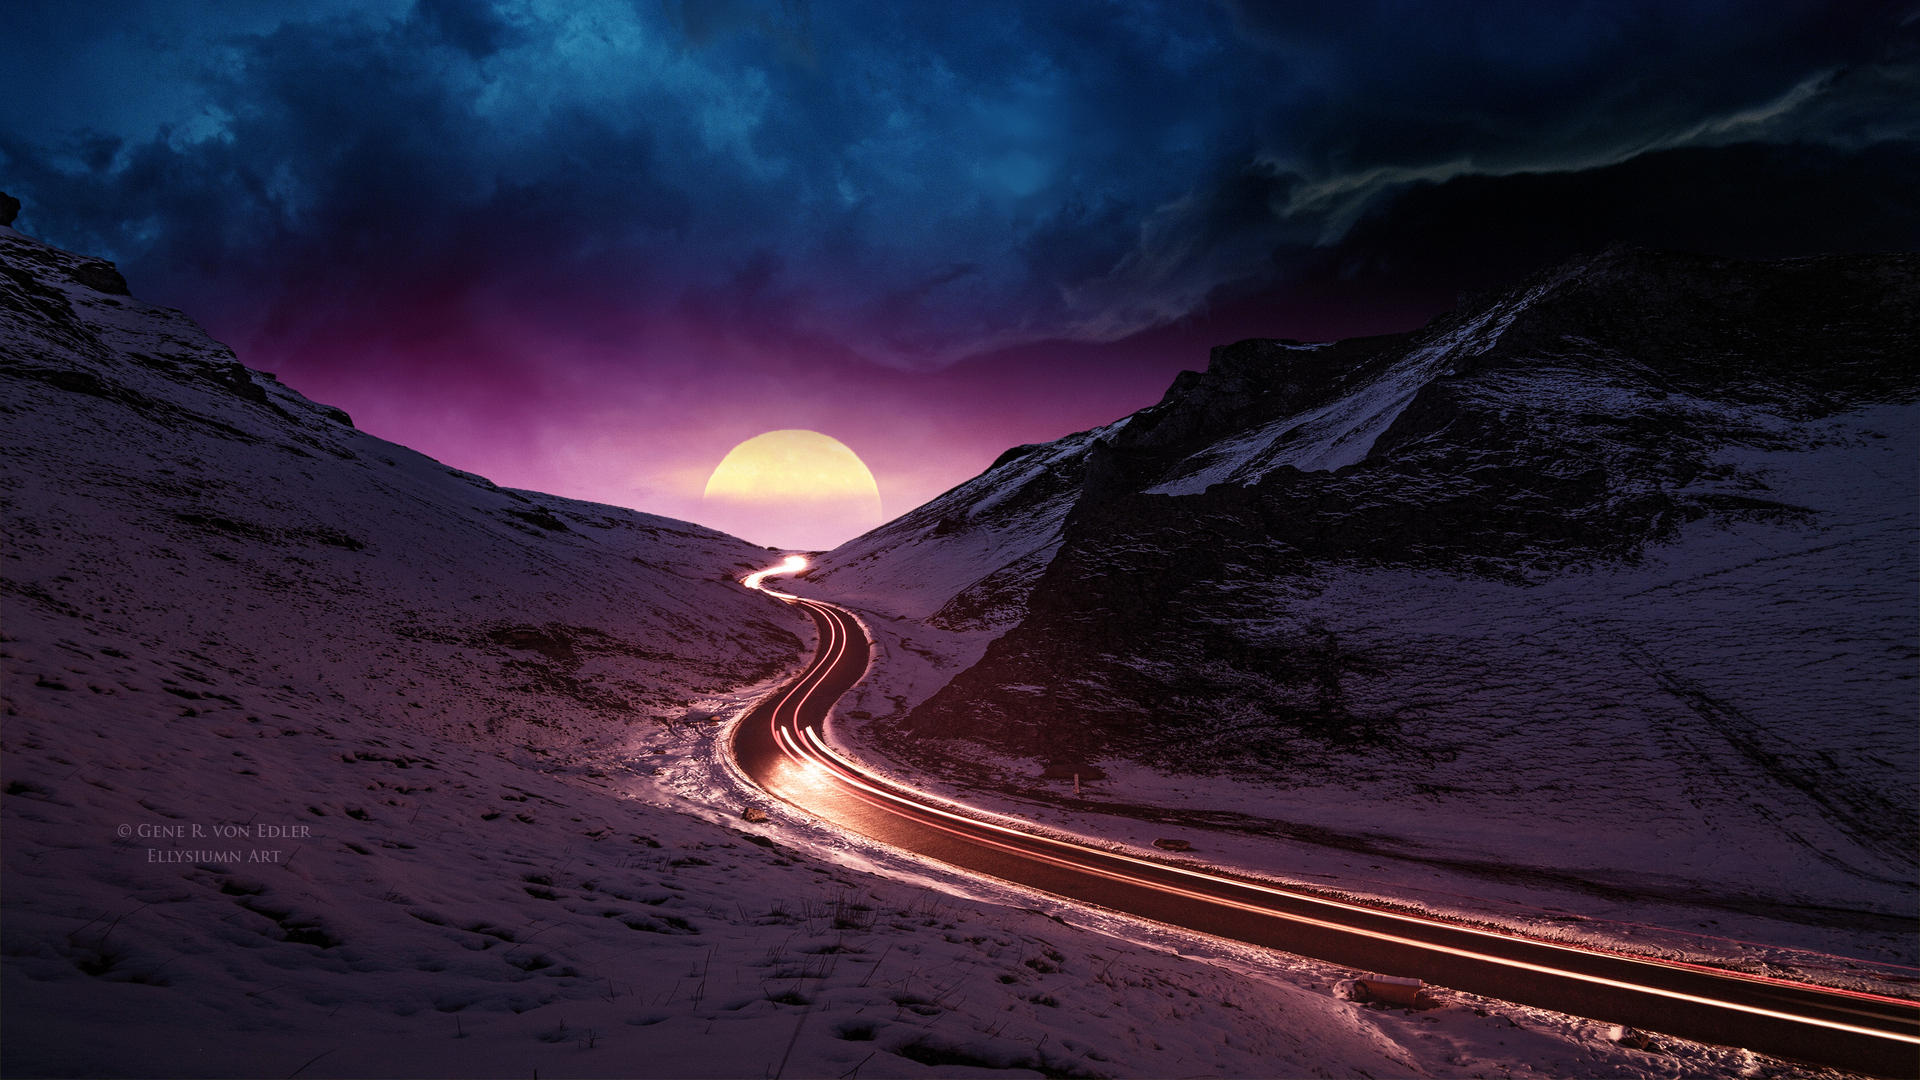 Hd Road View With Sunset Wallpapers